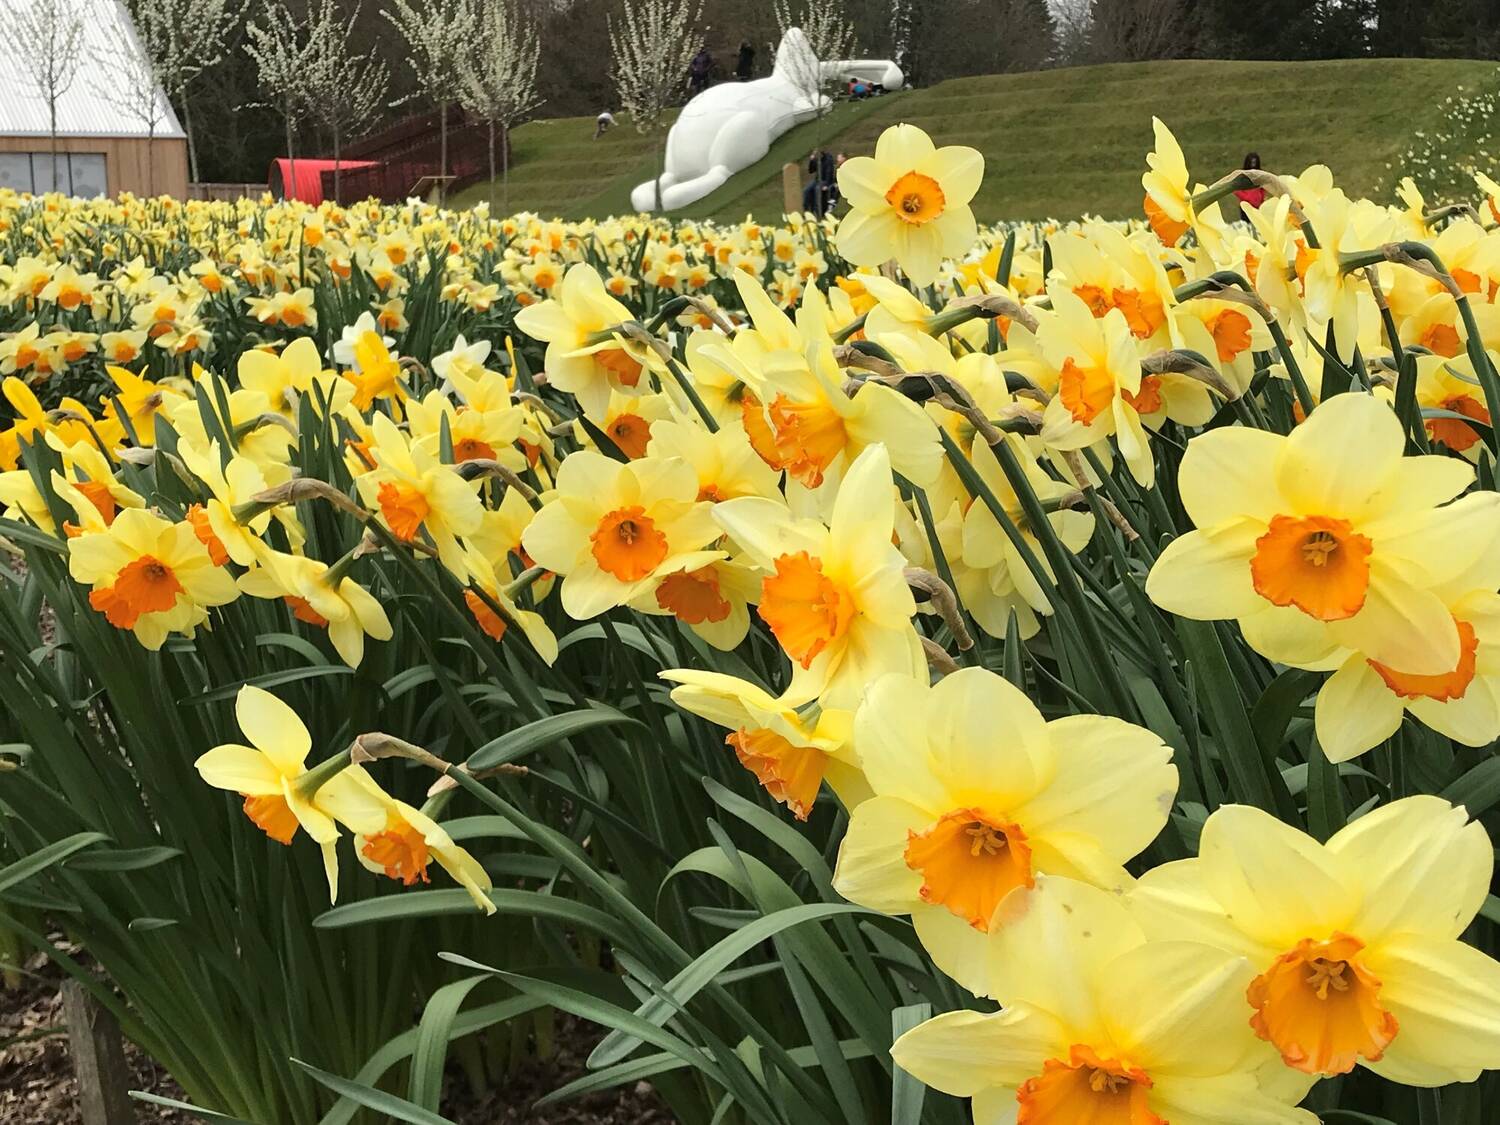 A host of golden daffodils, with deep yellow trumpets, grow beside a grassy bank at Brodie Castle. In the distance a large white bunny model can be seen lying on the bank.